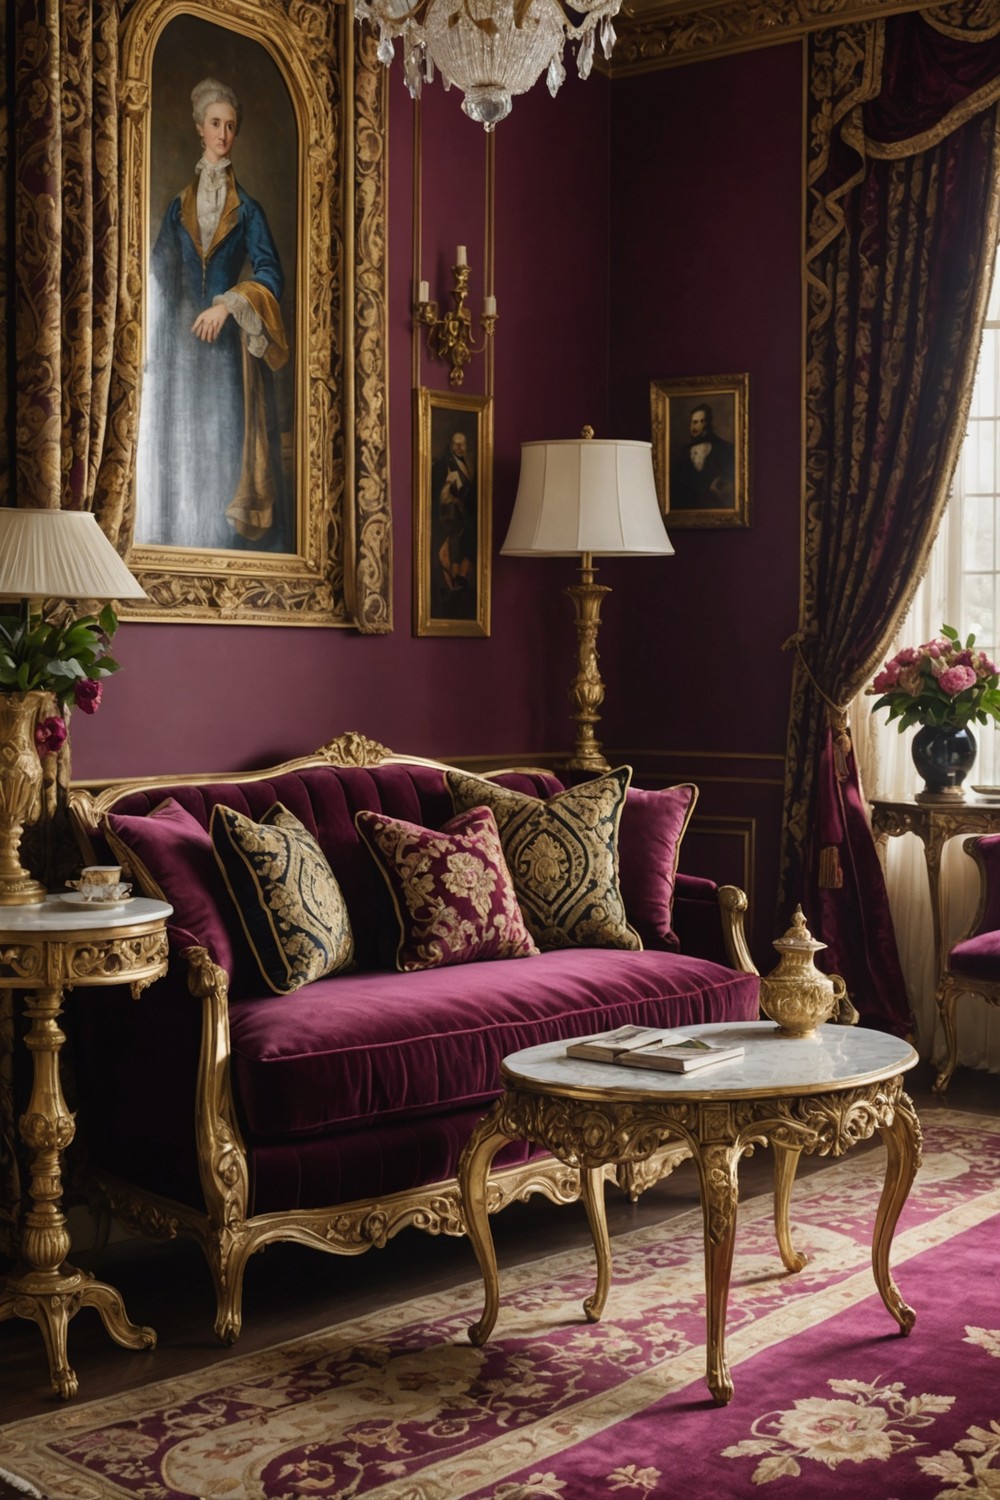 Luxurious Textiles: Velvet, Silk, and Lace in Your Decor